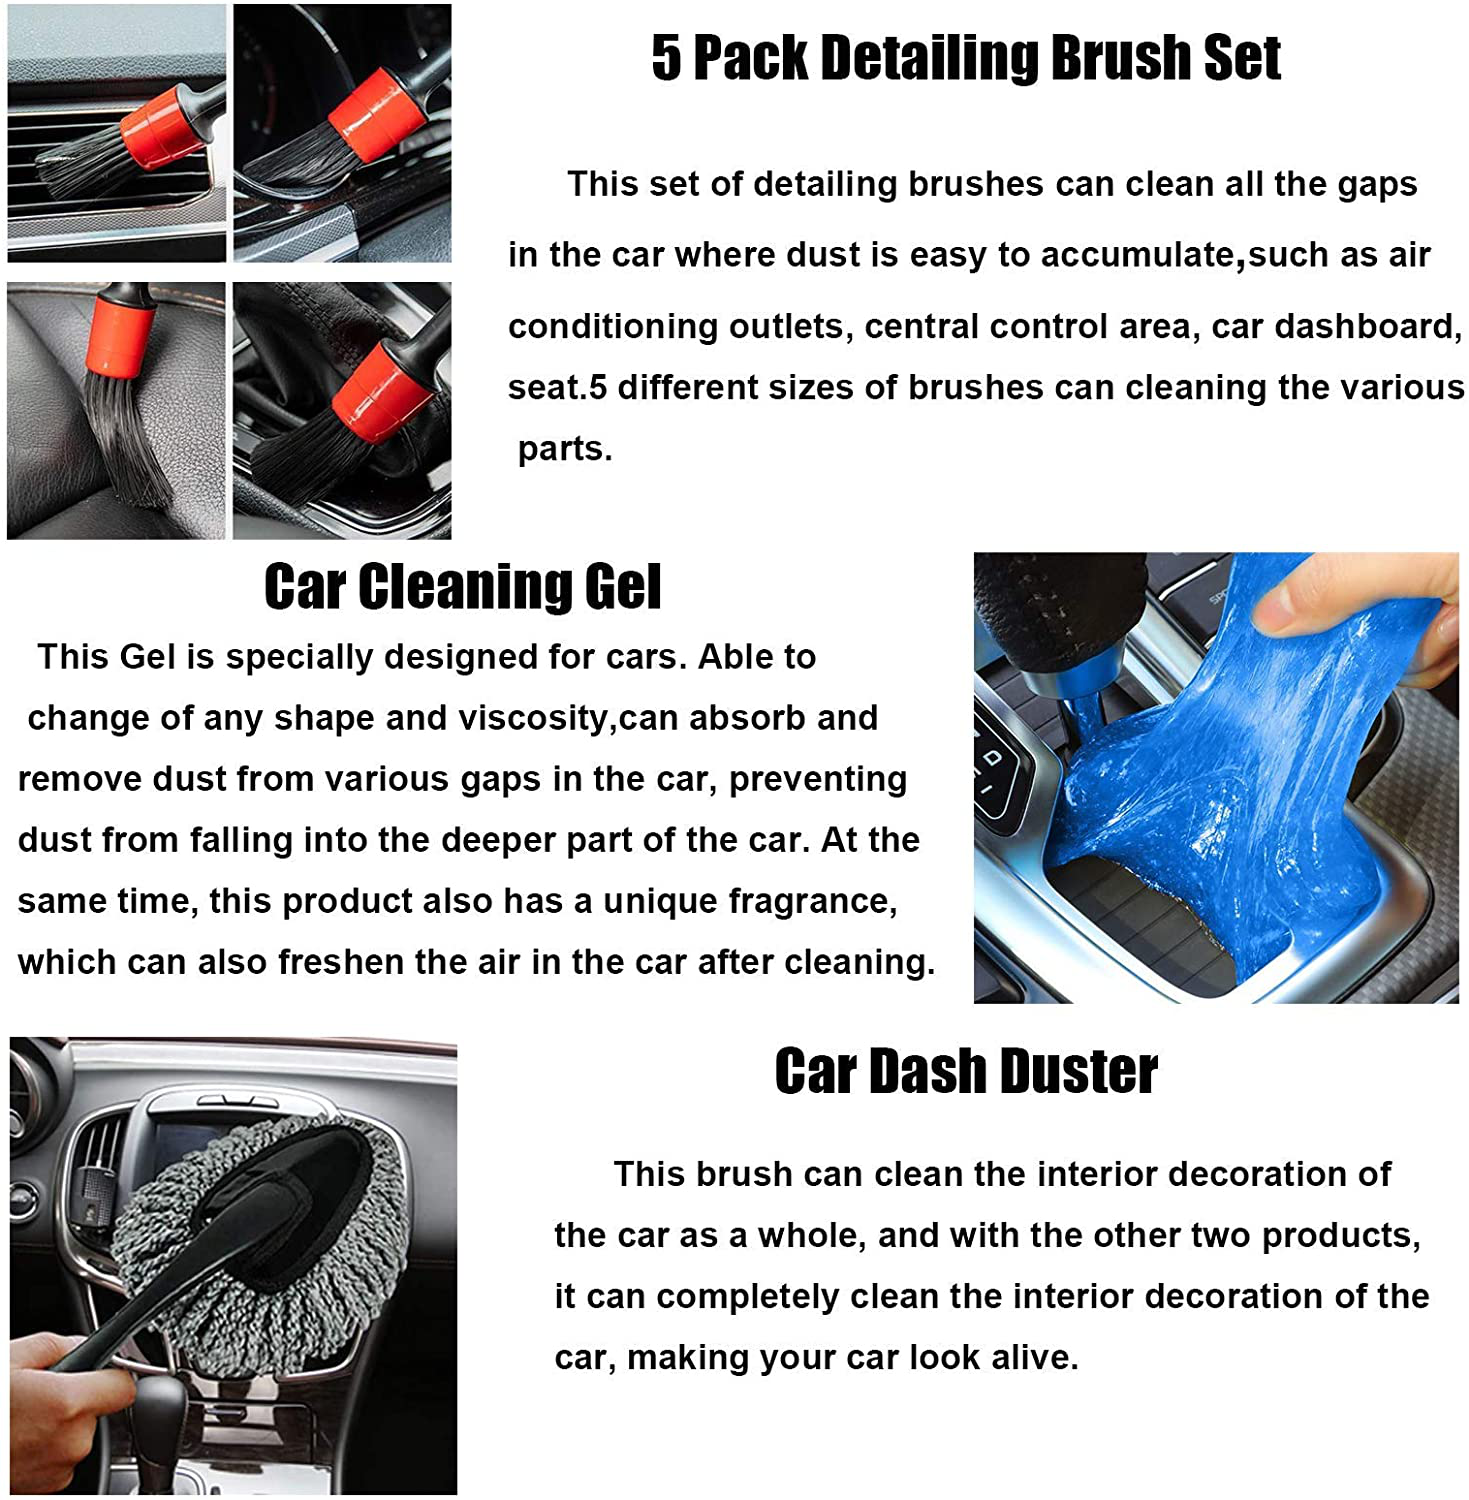 ELAMASICO Car Wash Kit with Box,Interior Car Detailing Kit,Car Detailing Tools Cleaning Kit-Detailing Brushes Set,Cleaning Gel,Microfiber Cleaning Cloth,Car Wash Mitt,Duster,Squeegee(14 PCS)